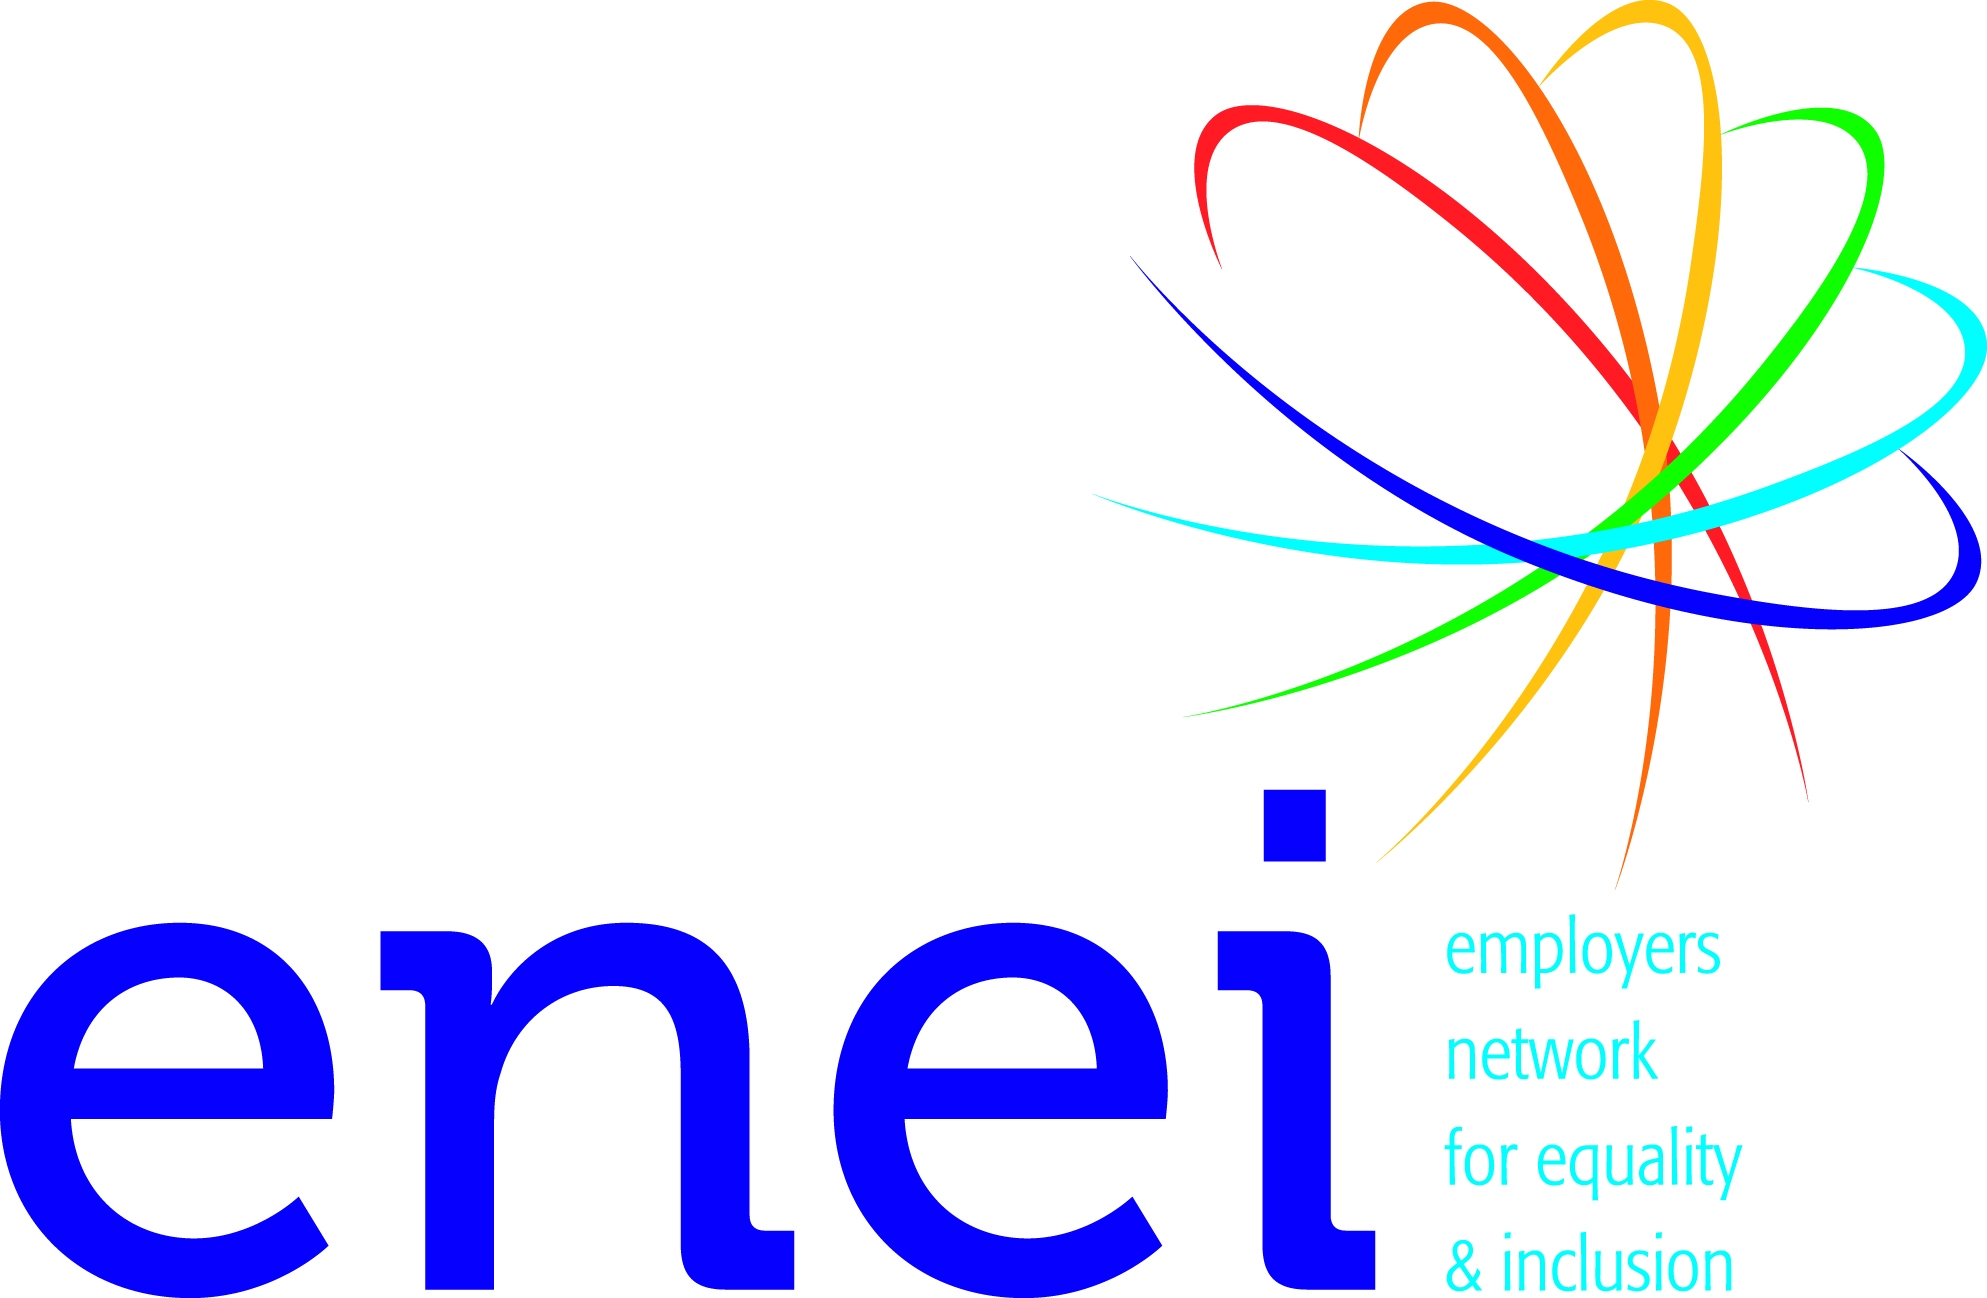 Employers Network for Equality Inclusion